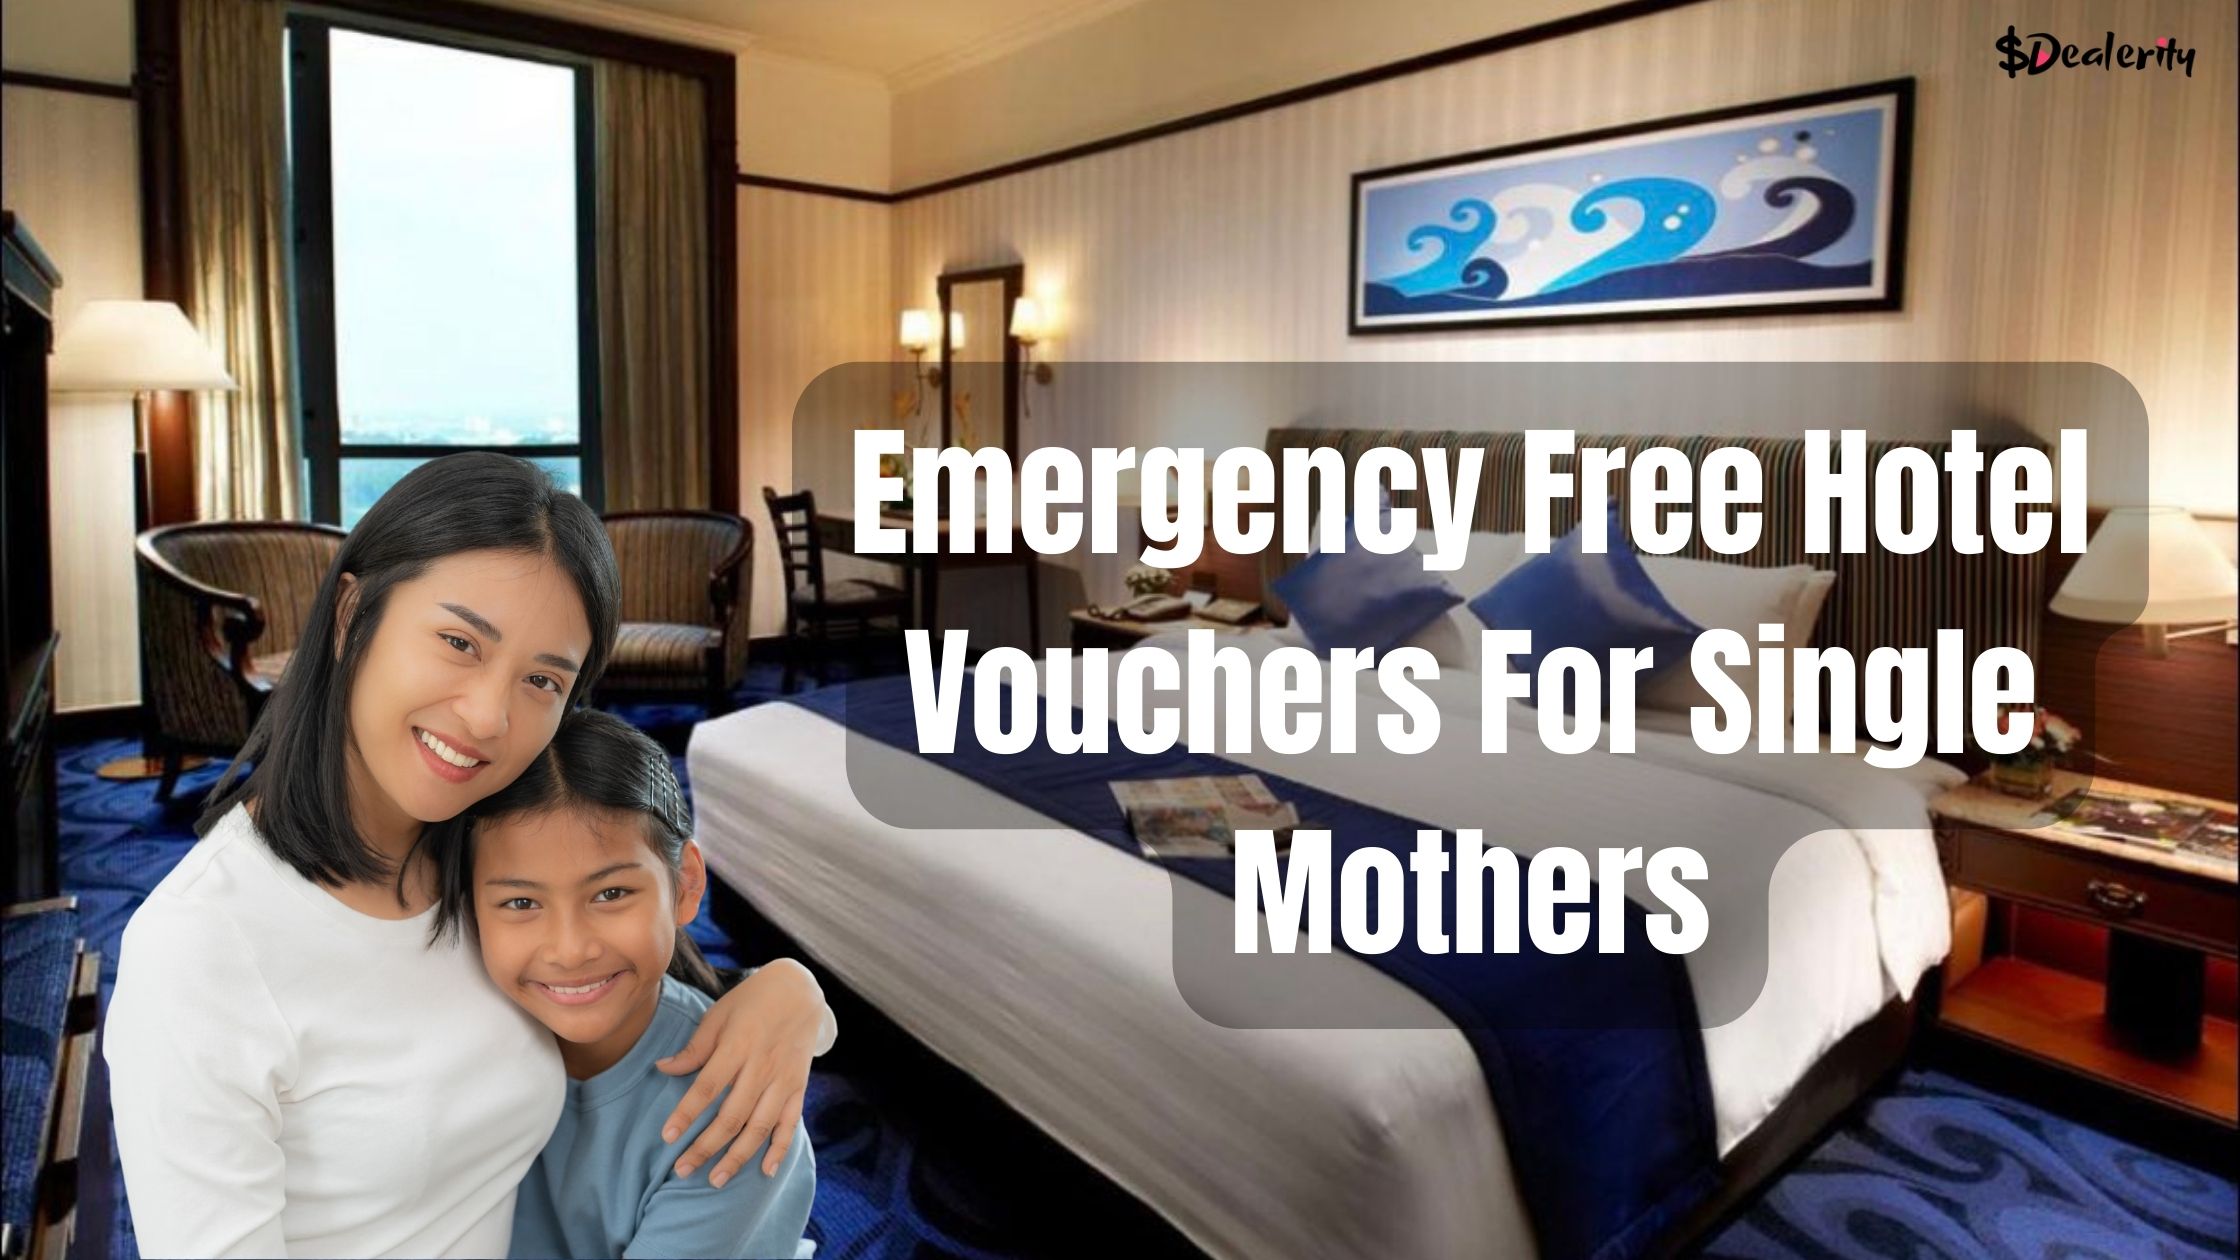 Emergency Free Hotel Vouchers For Single Mothers